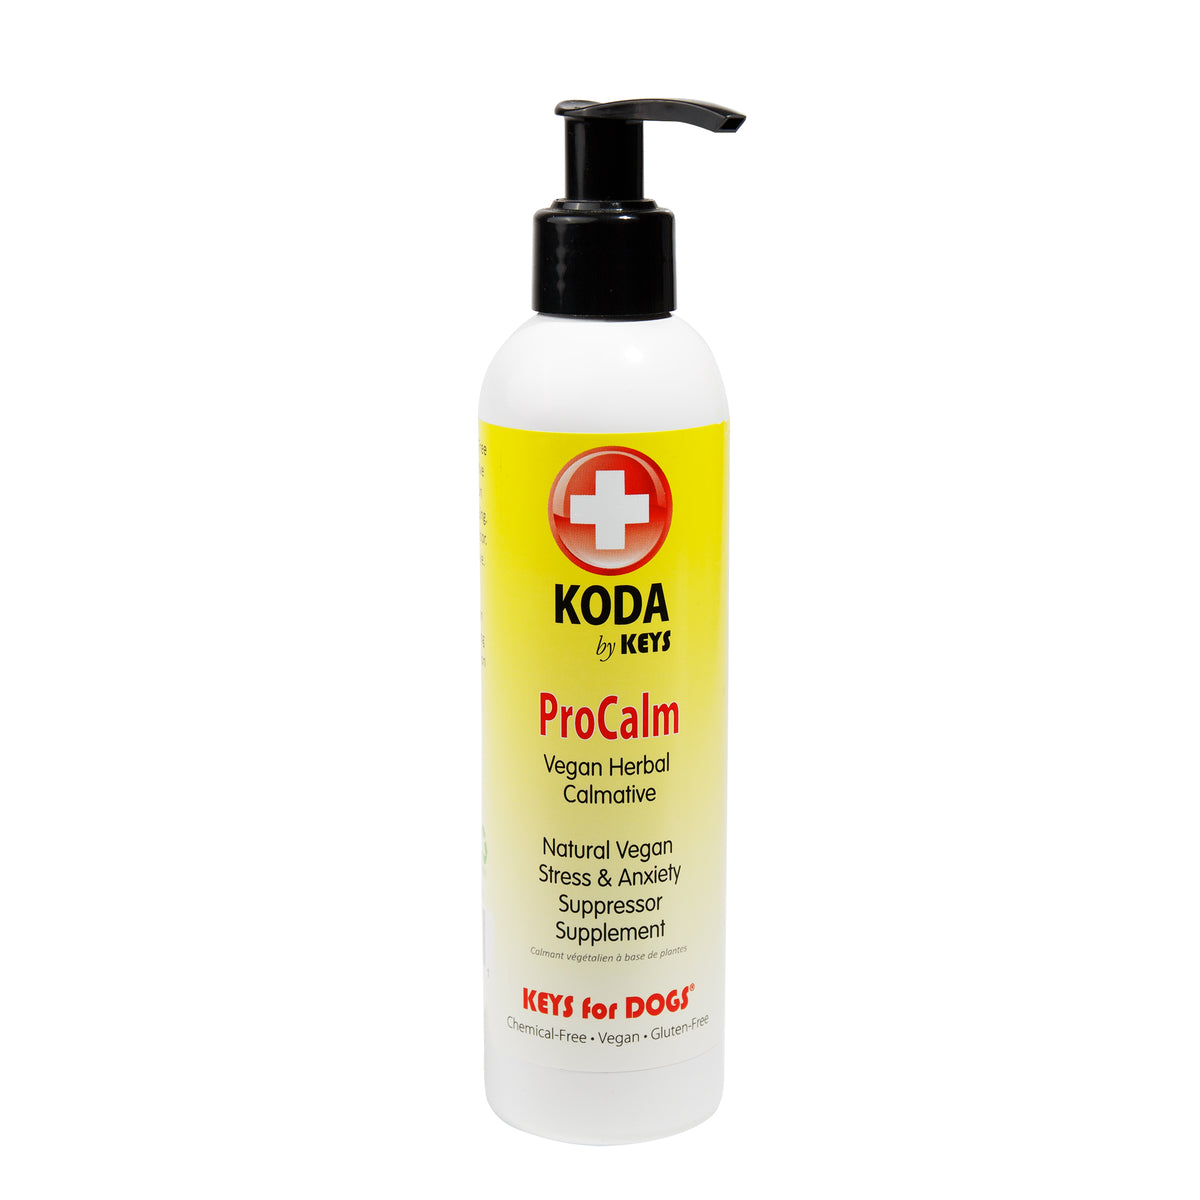 Primary image of Koda ProCalm Calmative for Dogs